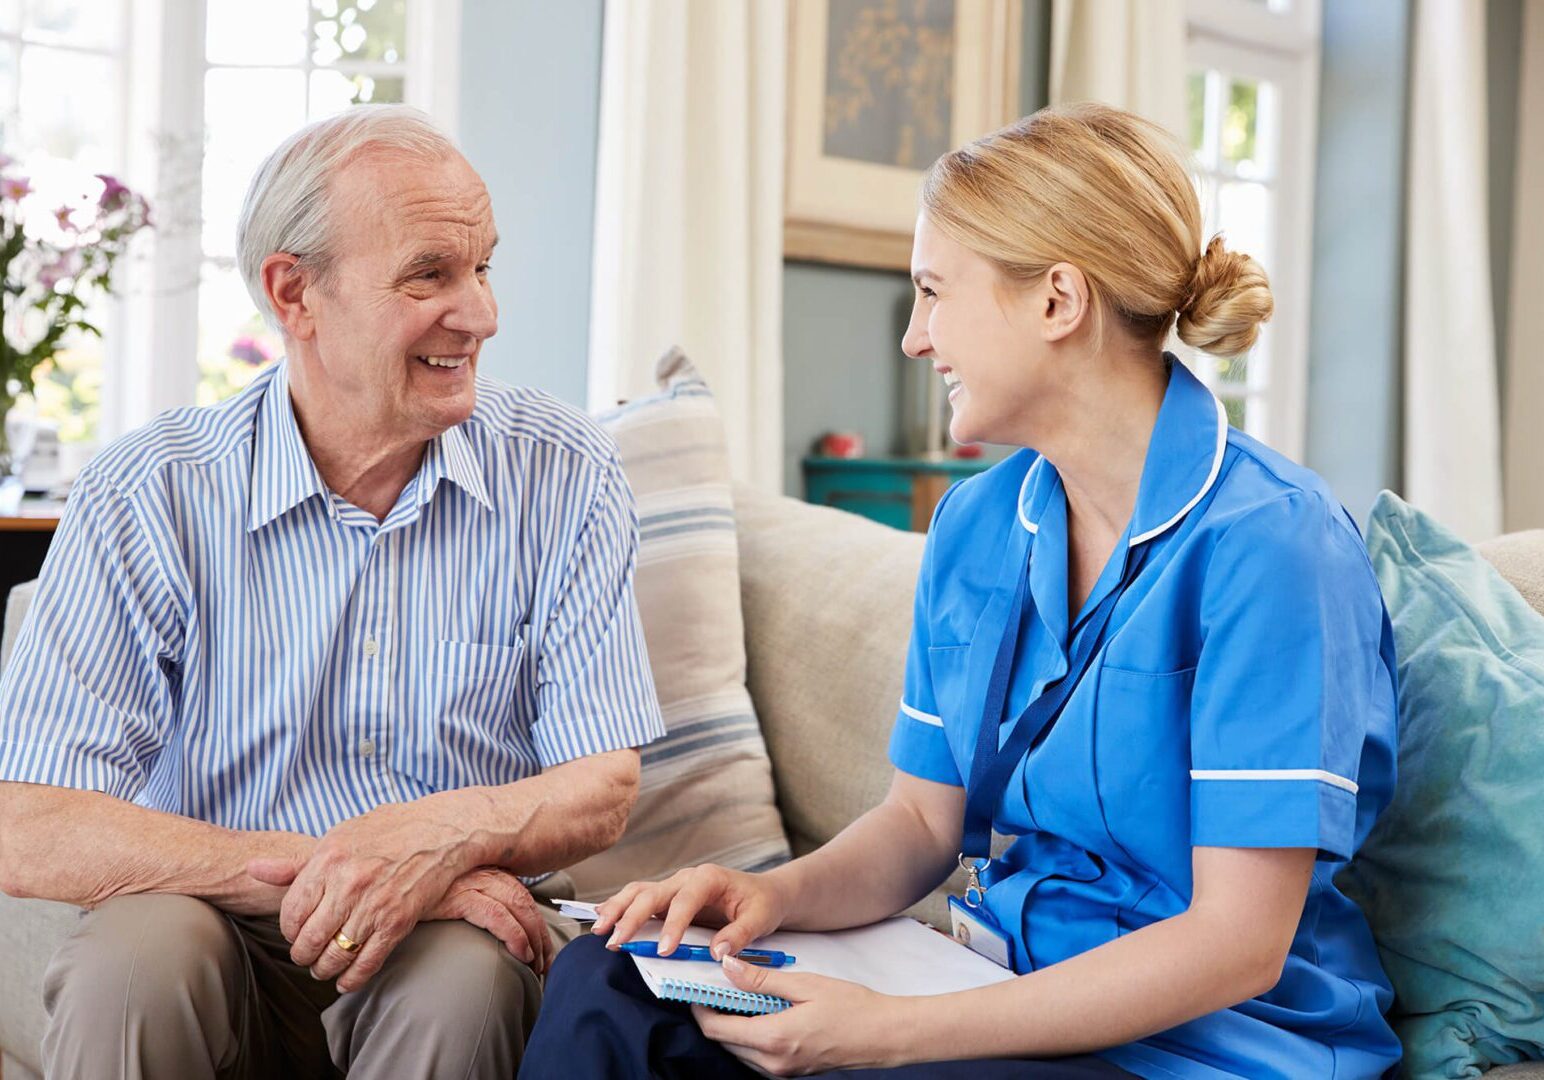 A Care Worker talking to an older man in blue shirt.